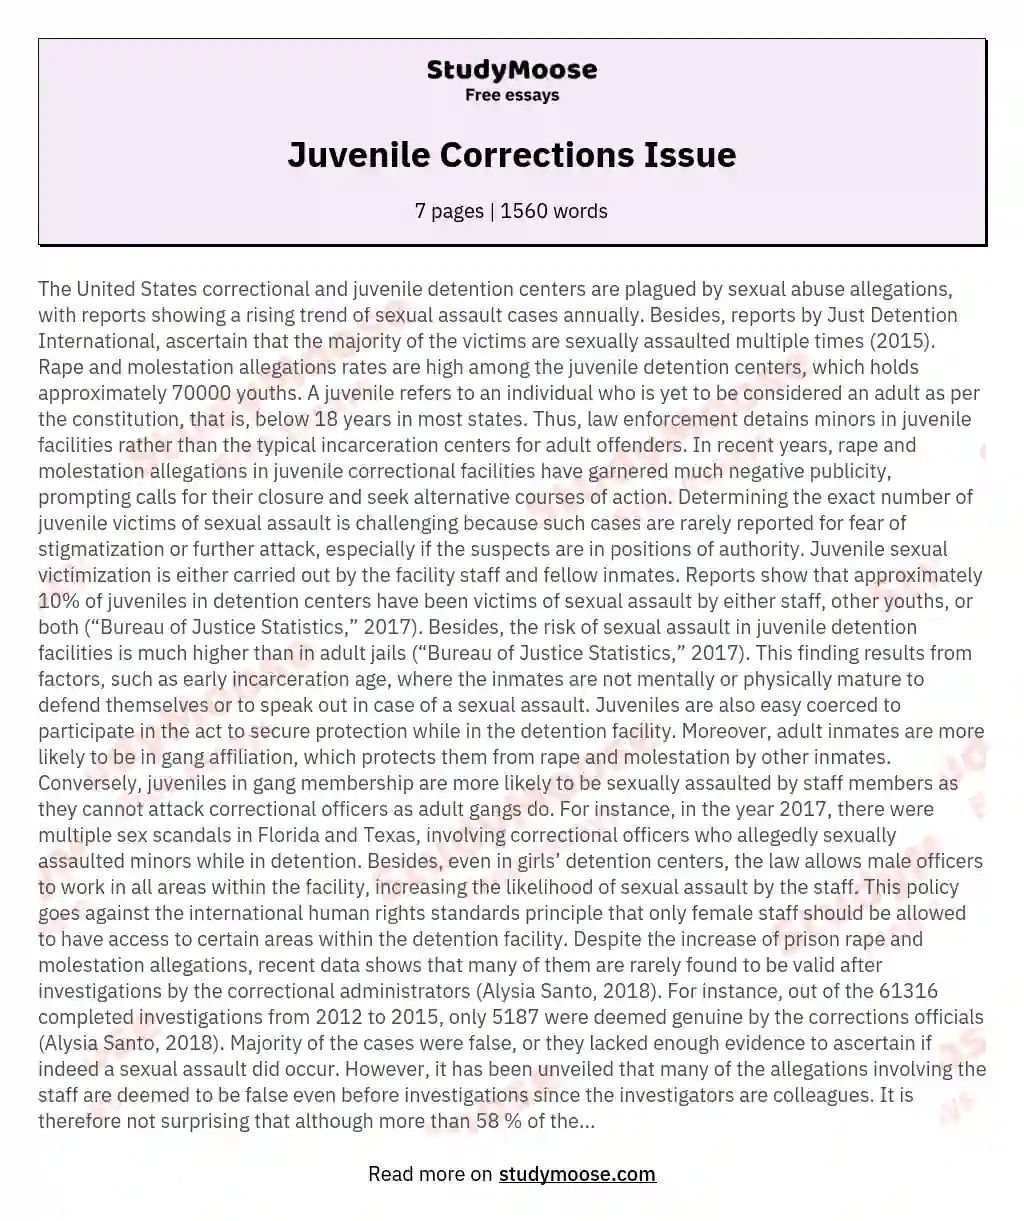 Juvenile Corrections Issue essay